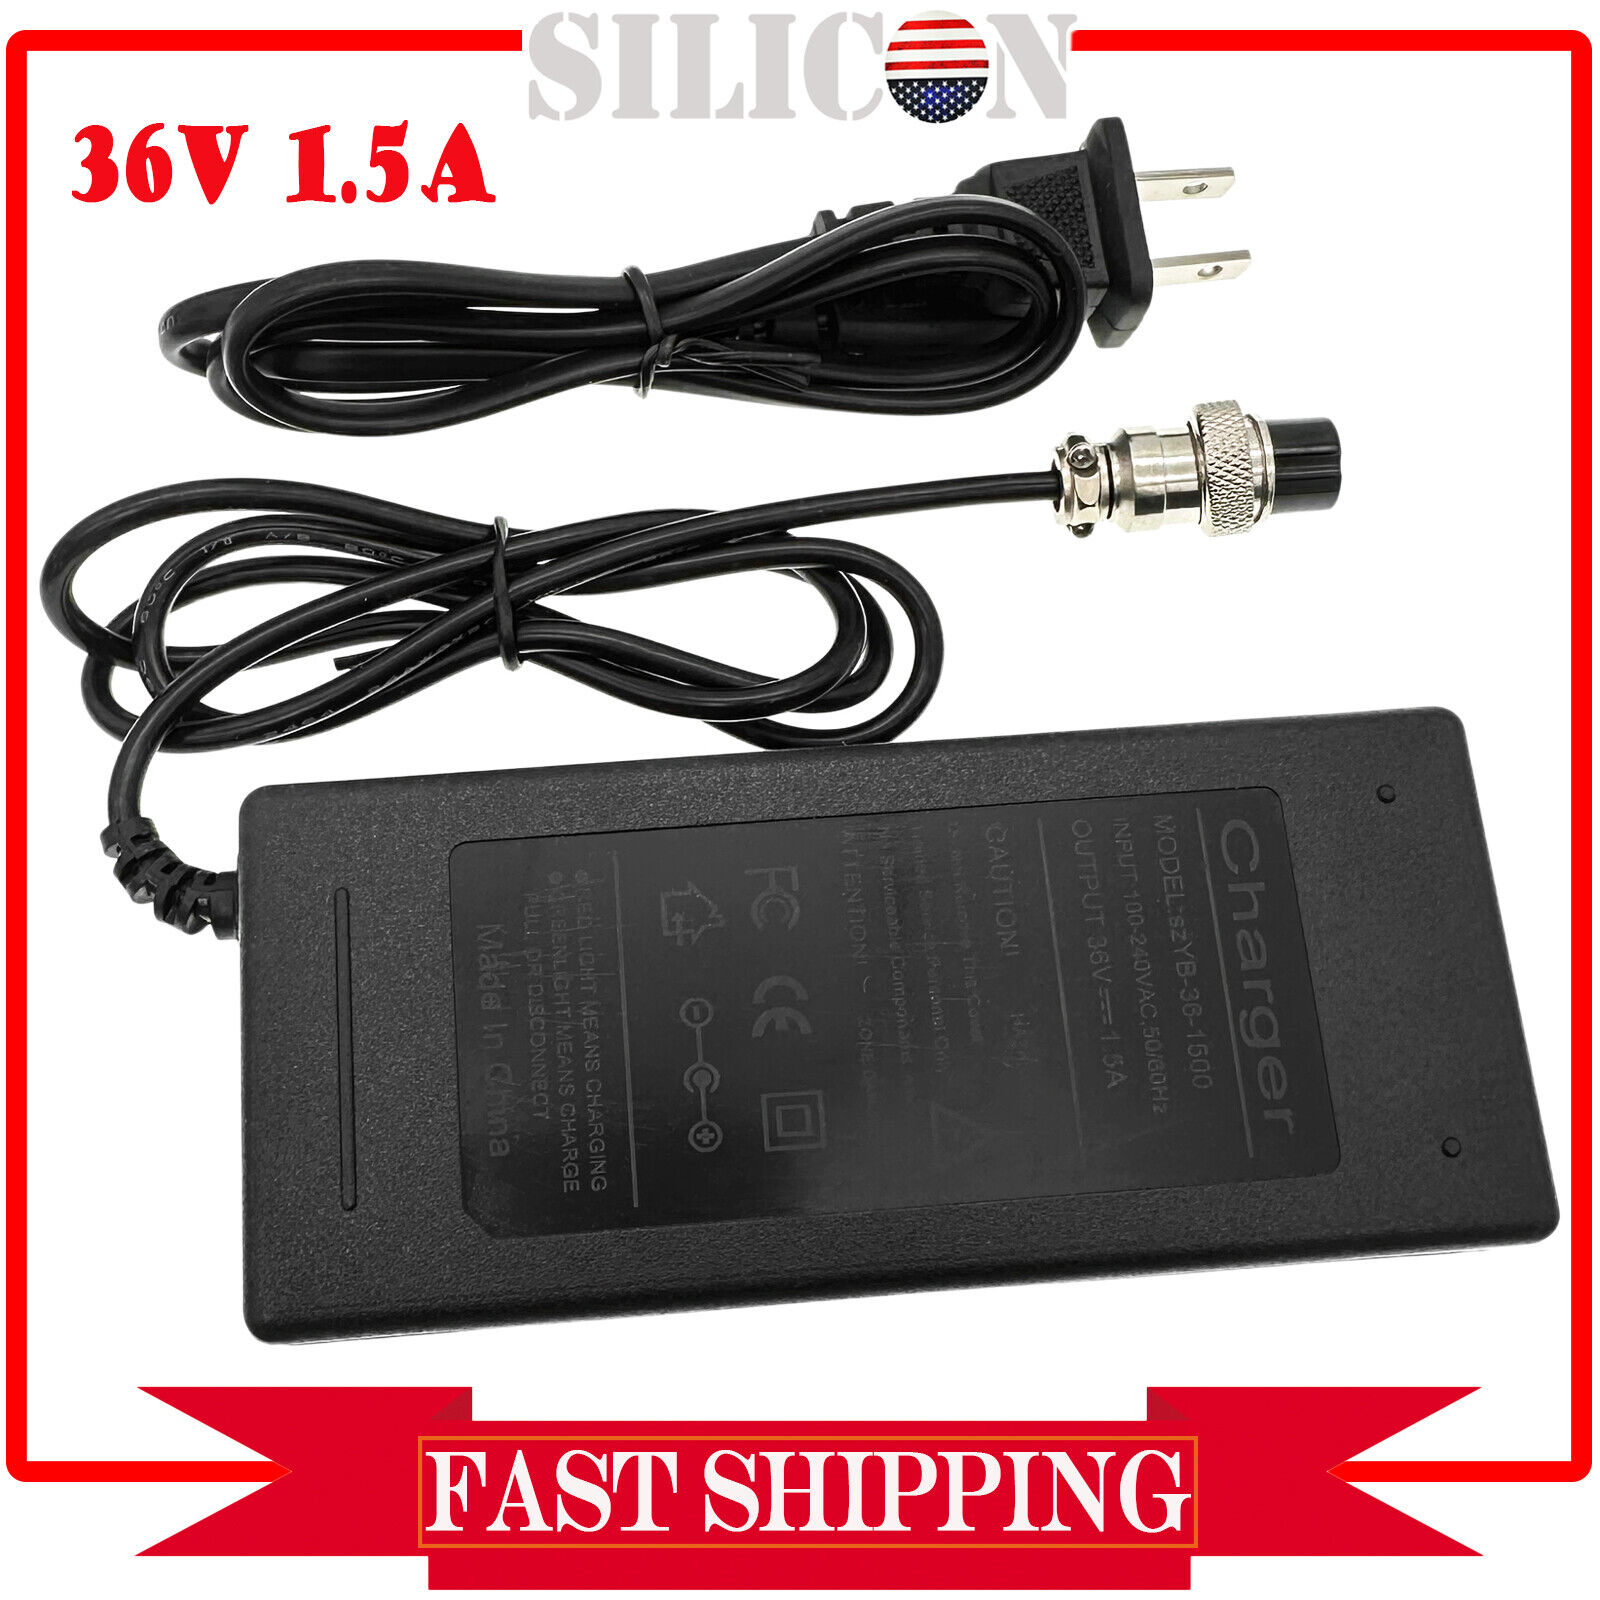 New 36V 1.5A Scooter Battery Charger For Freedom 945 959 City Express E-Scooter New 36V 1.5A Scooter Battery Charger Fo - Click Image to Close